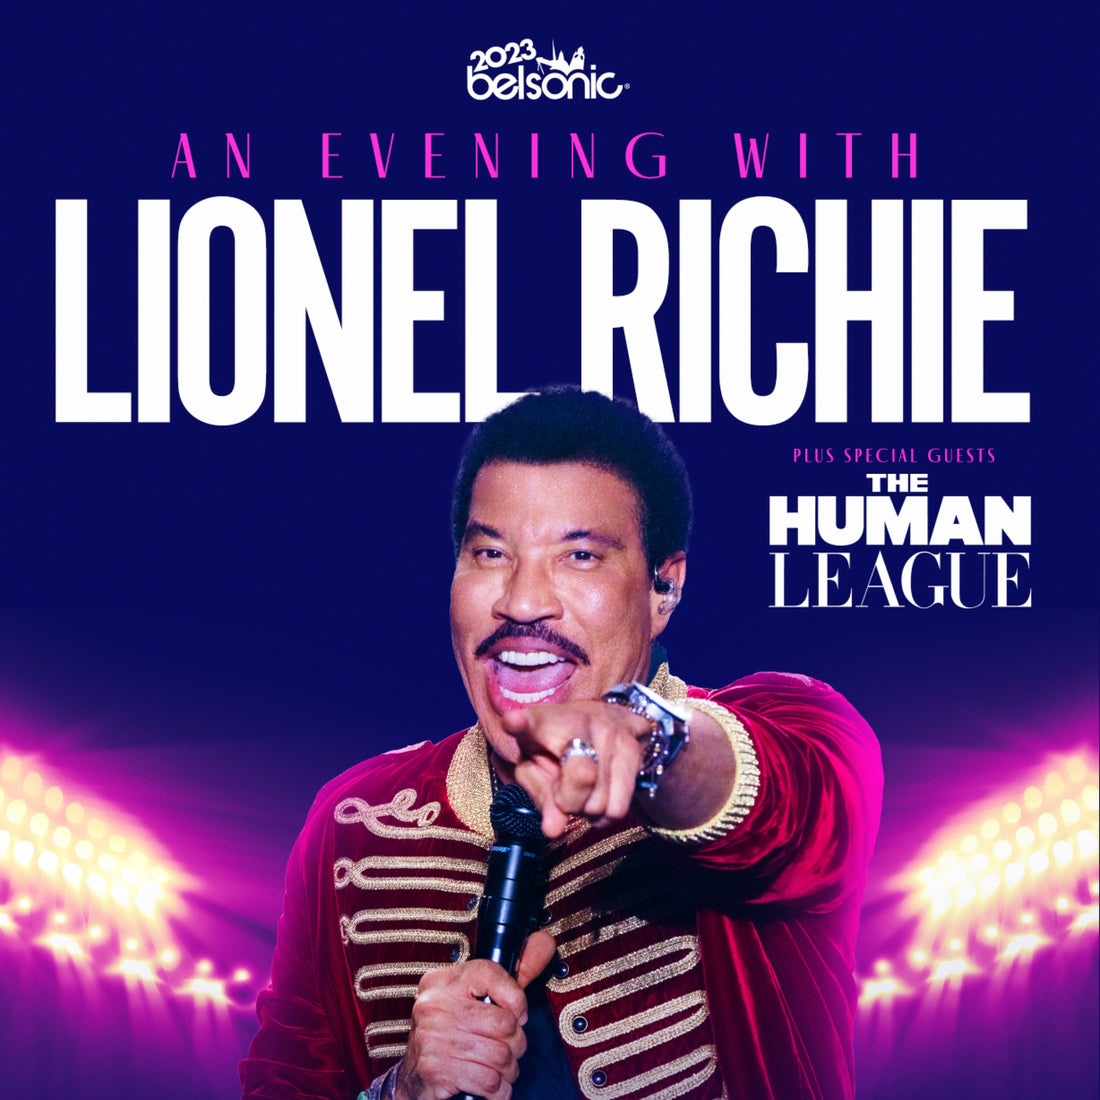 Lionel Richie to play Ormeau Park, Belfast in 2023